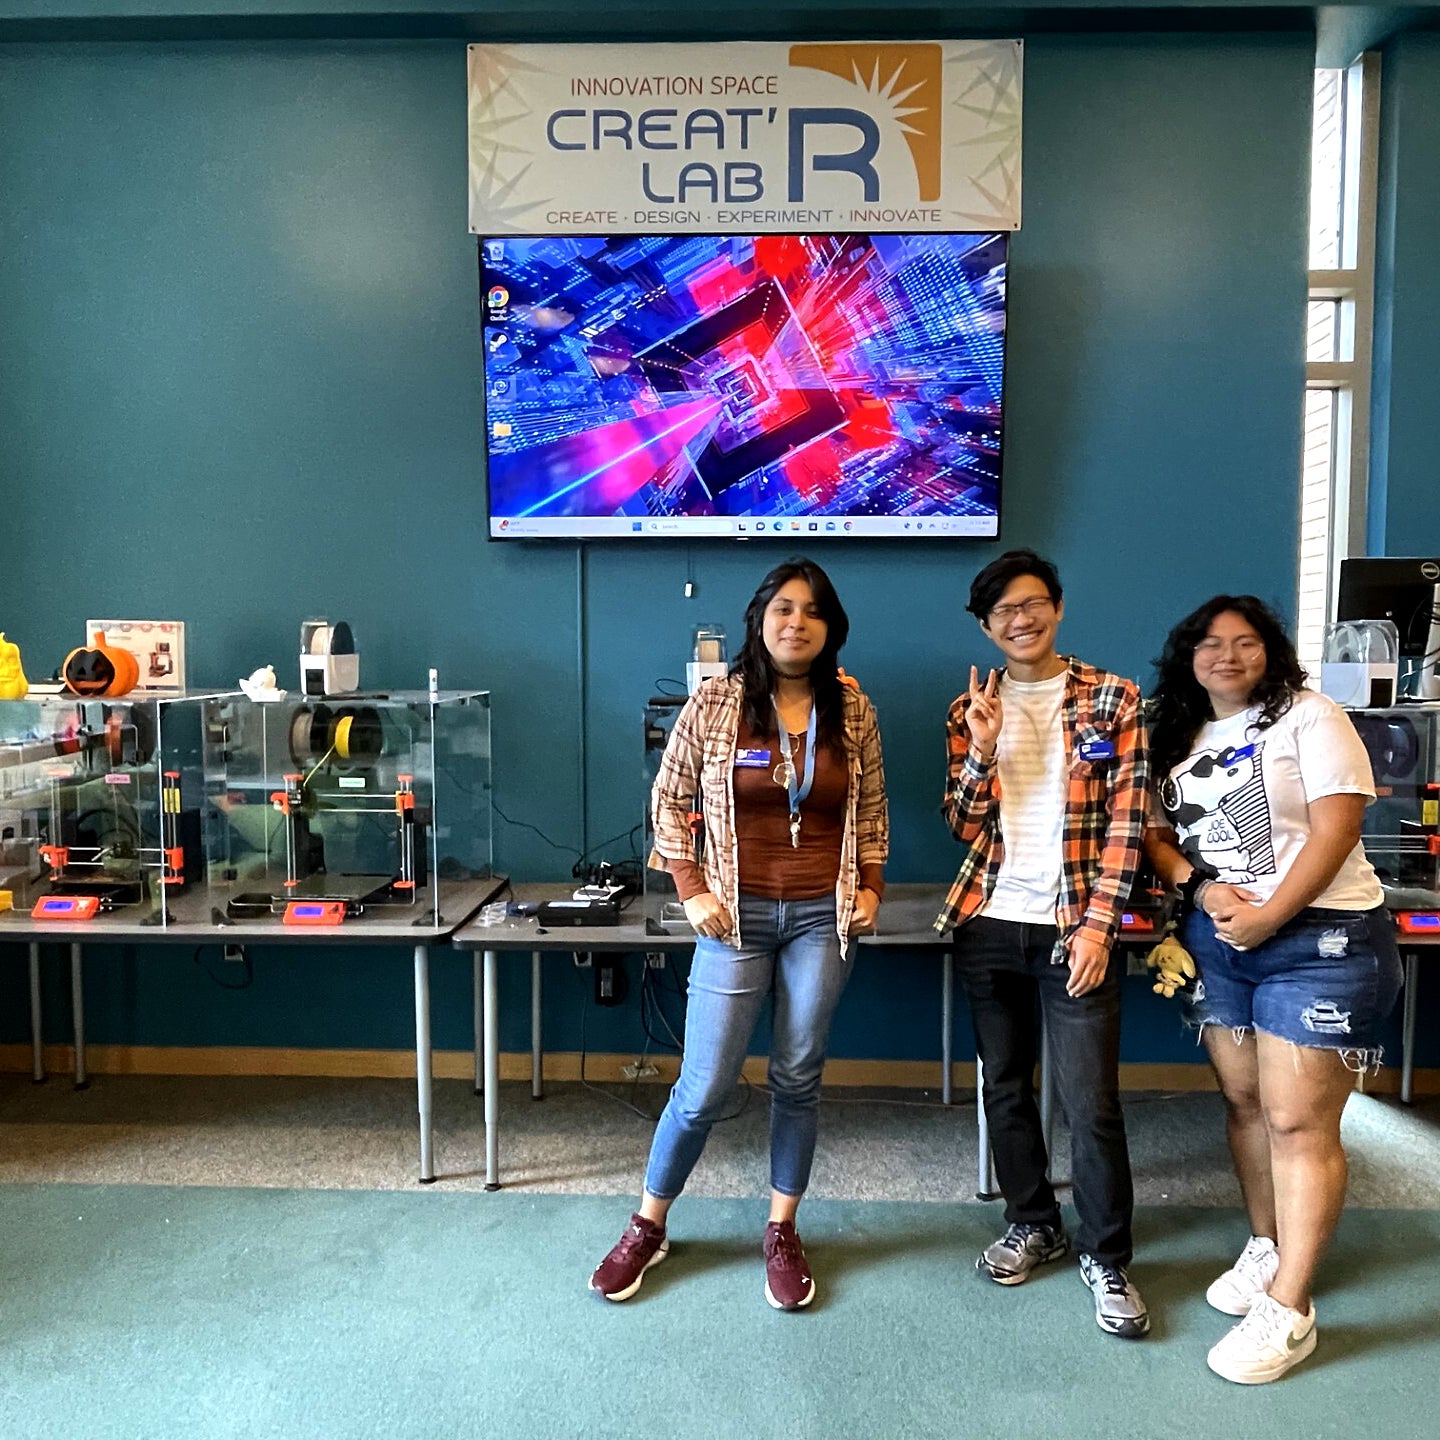 Three students, two females flanking one male, pose inside the Creat'R Lab on the UCR campus.